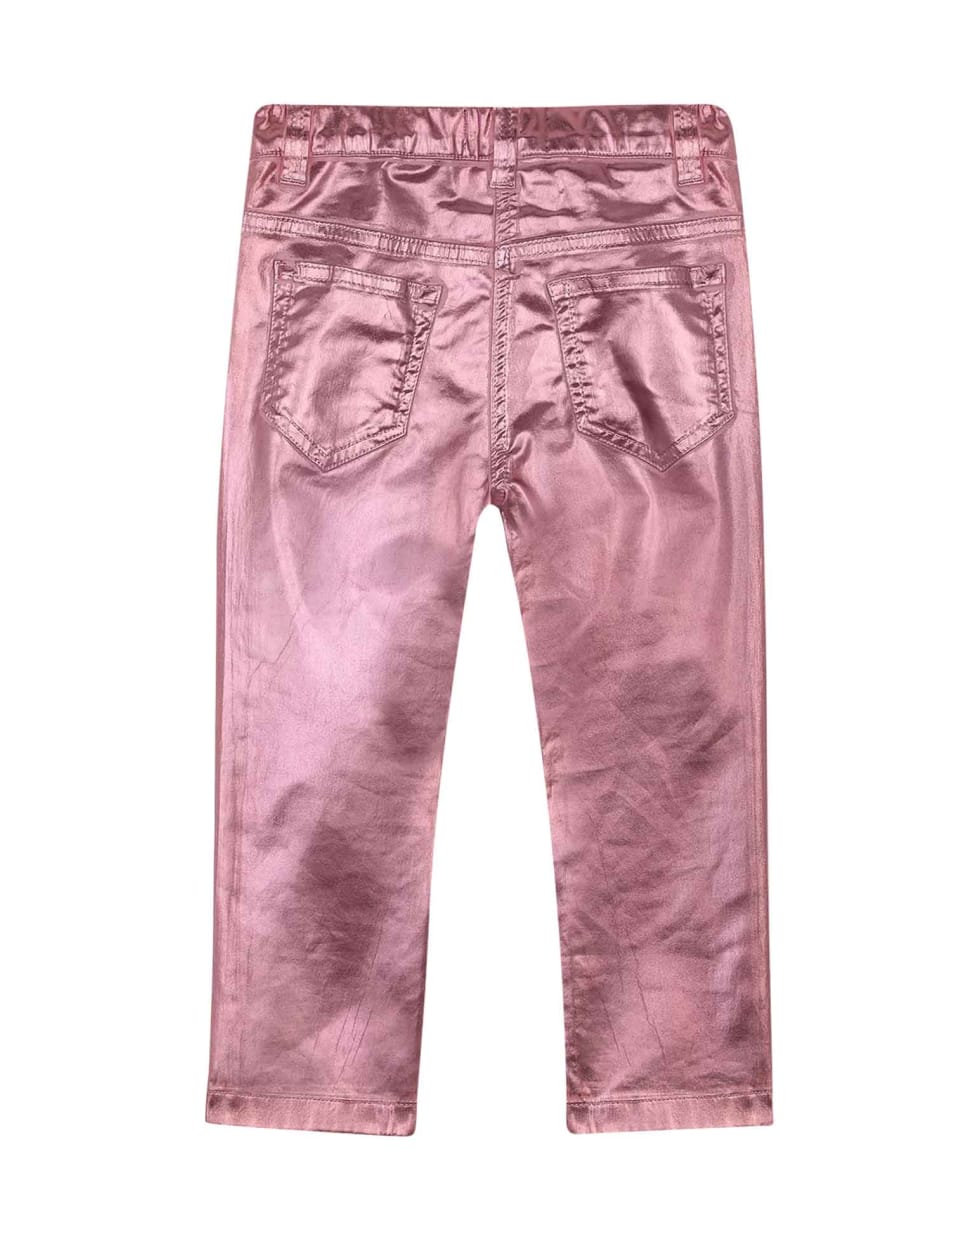 Dolce & Gabbana Pink Trousers - Rosa